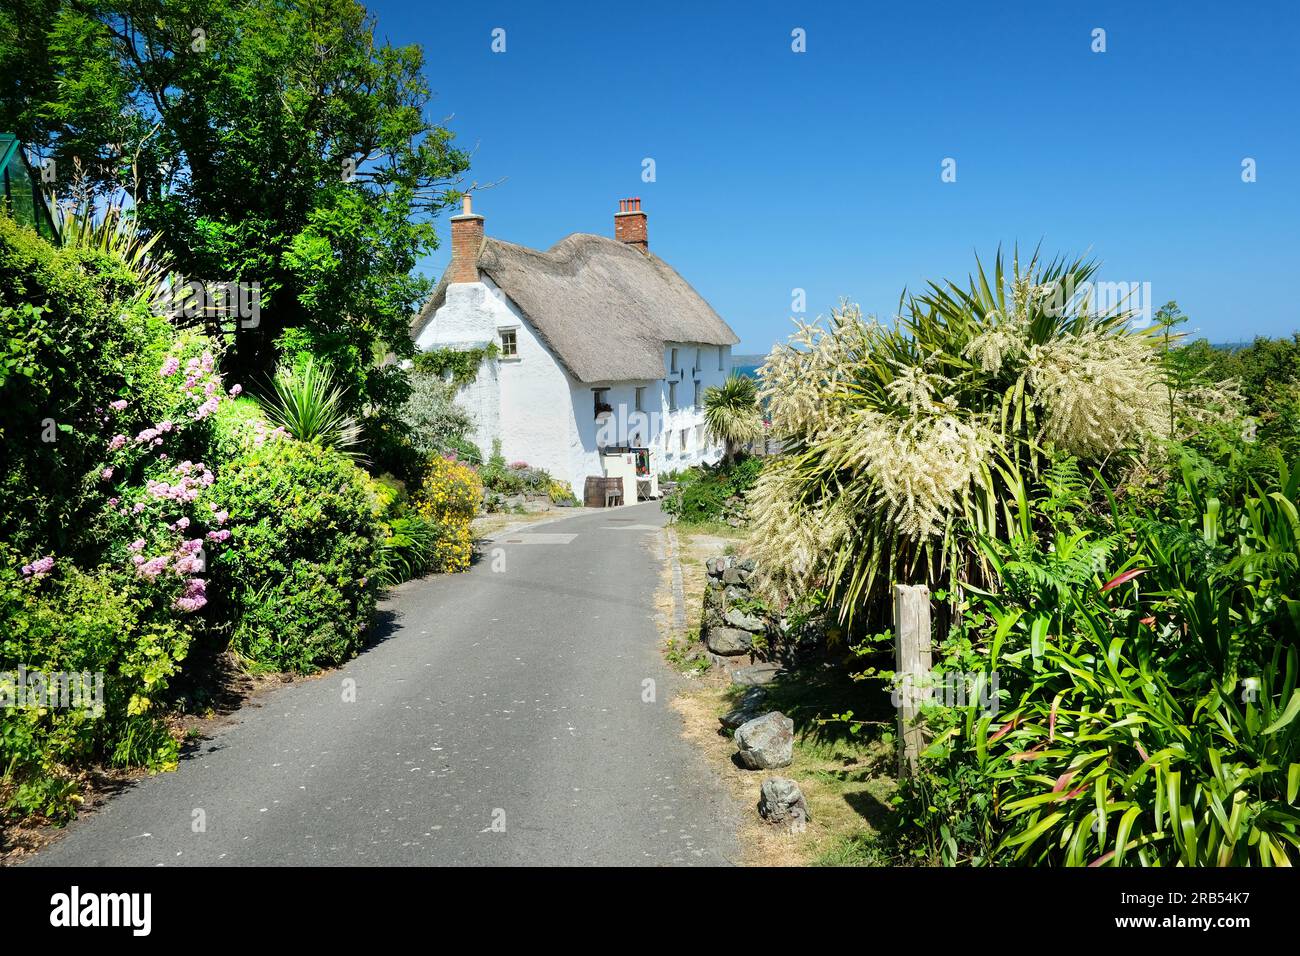 Leafy lane leading to a thatched cottage at Church Cove on the Lizard Peninsula, Cornwall, UK - John Gollop Stock Photo